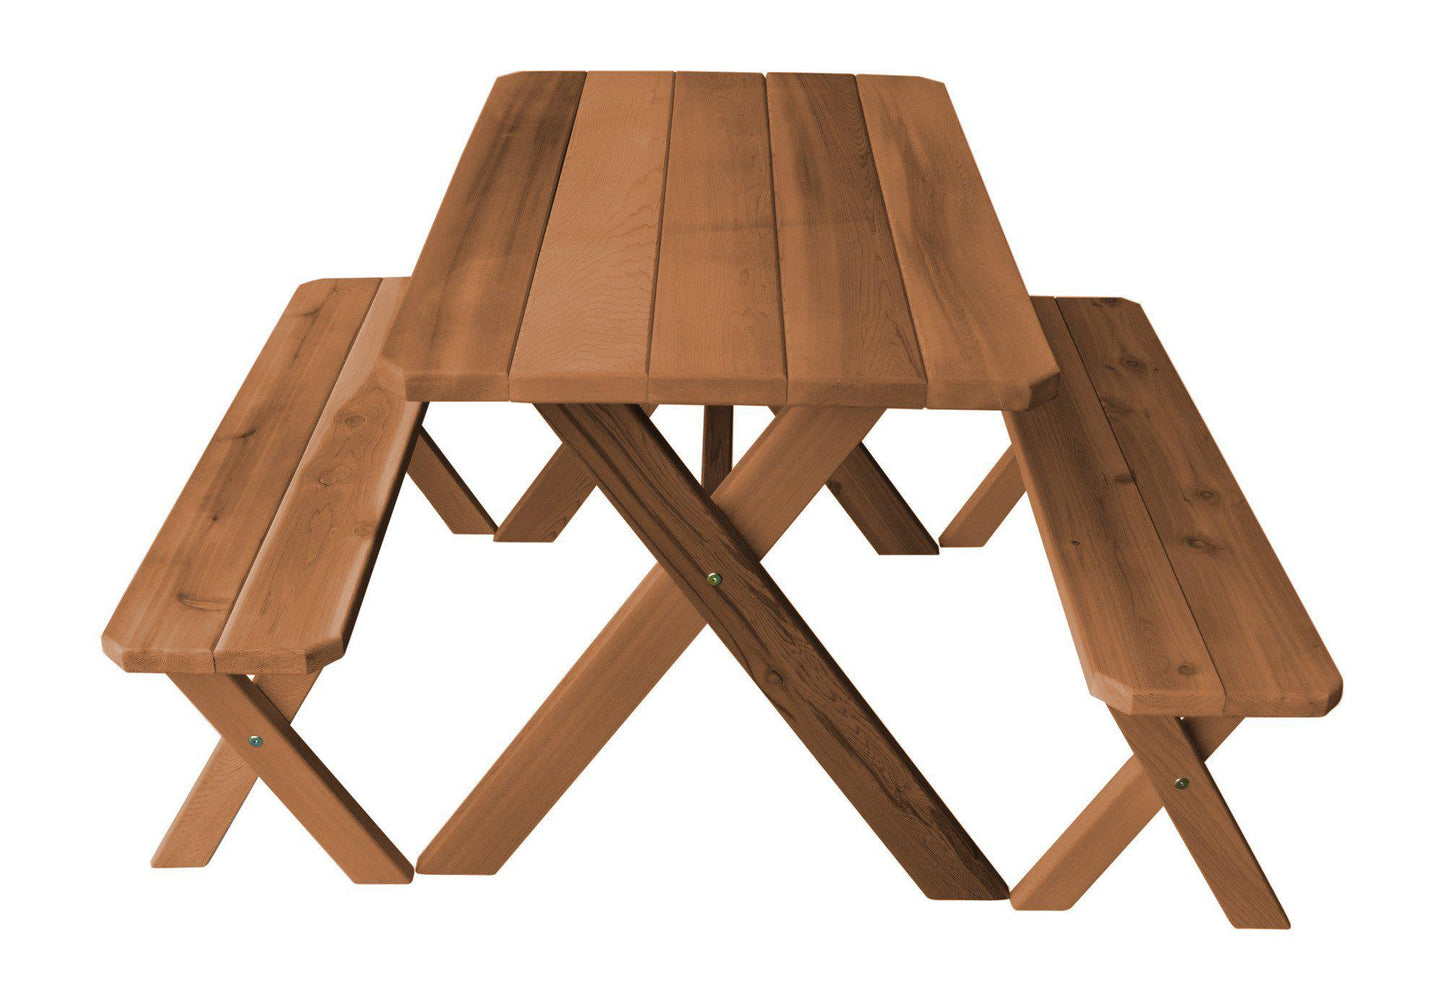 A&L FURNITURE CO. Western Red Cedar 5' Cross-leg Table w/2 Benches - Specify for FREE 2" Umbrella Hole - LEAD TIME TO SHIP 2 WEEKS